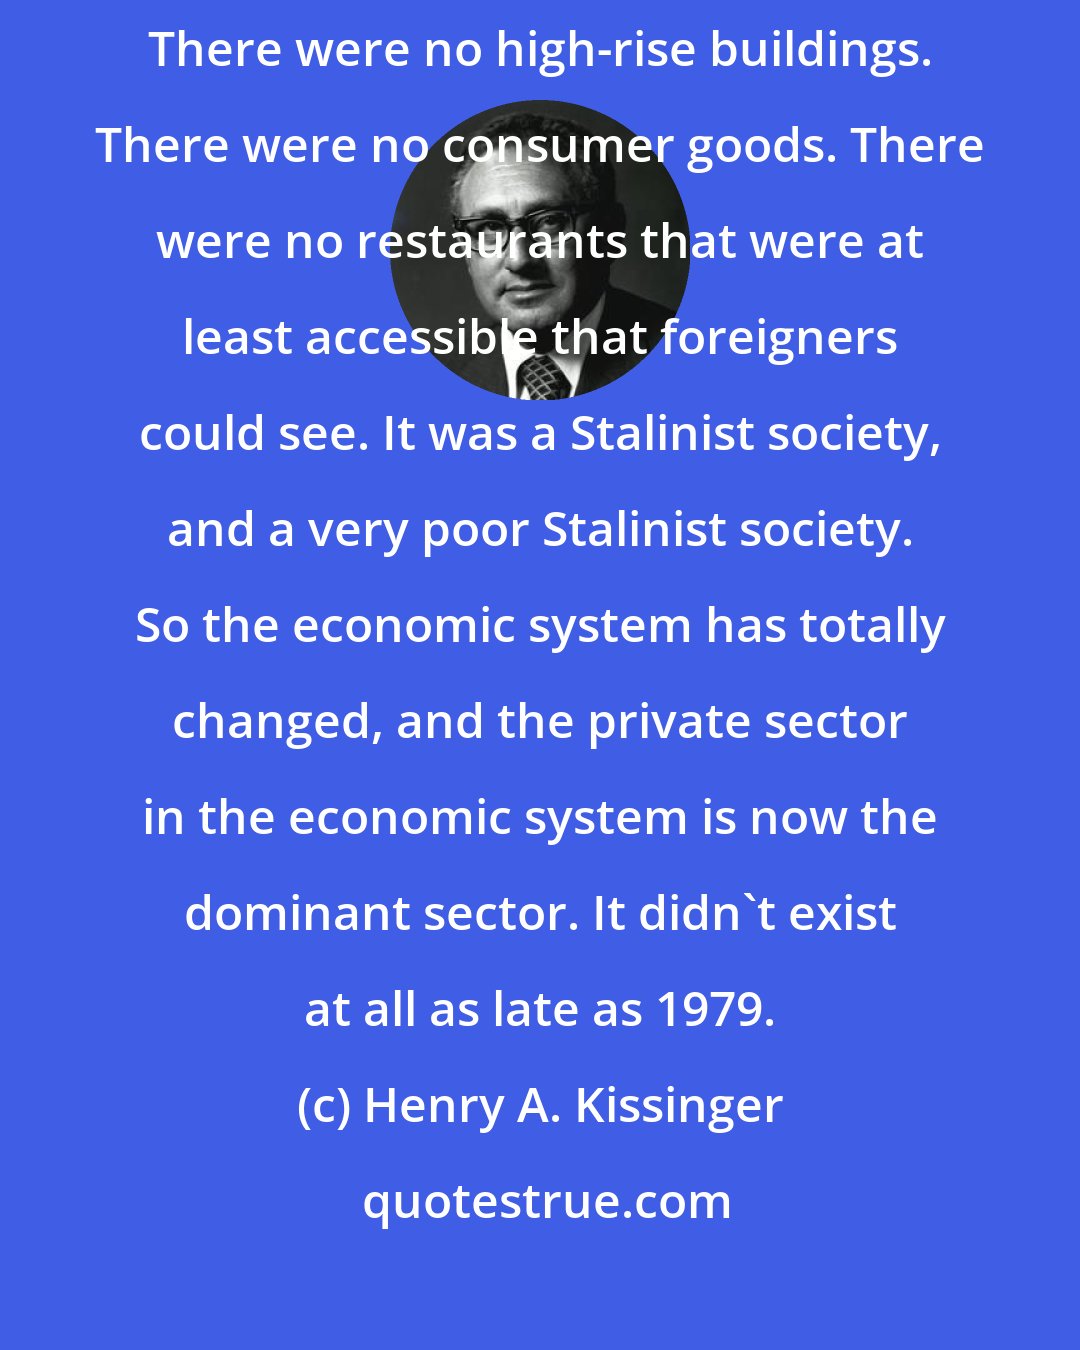 Henry A. Kissinger: When I first saw China, there were no automobiles. There were no supermarkets. There were no high-rise buildings. There were no consumer goods. There were no restaurants that were at least accessible that foreigners could see. It was a Stalinist society, and a very poor Stalinist society. So the economic system has totally changed, and the private sector in the economic system is now the dominant sector. It didn't exist at all as late as 1979.